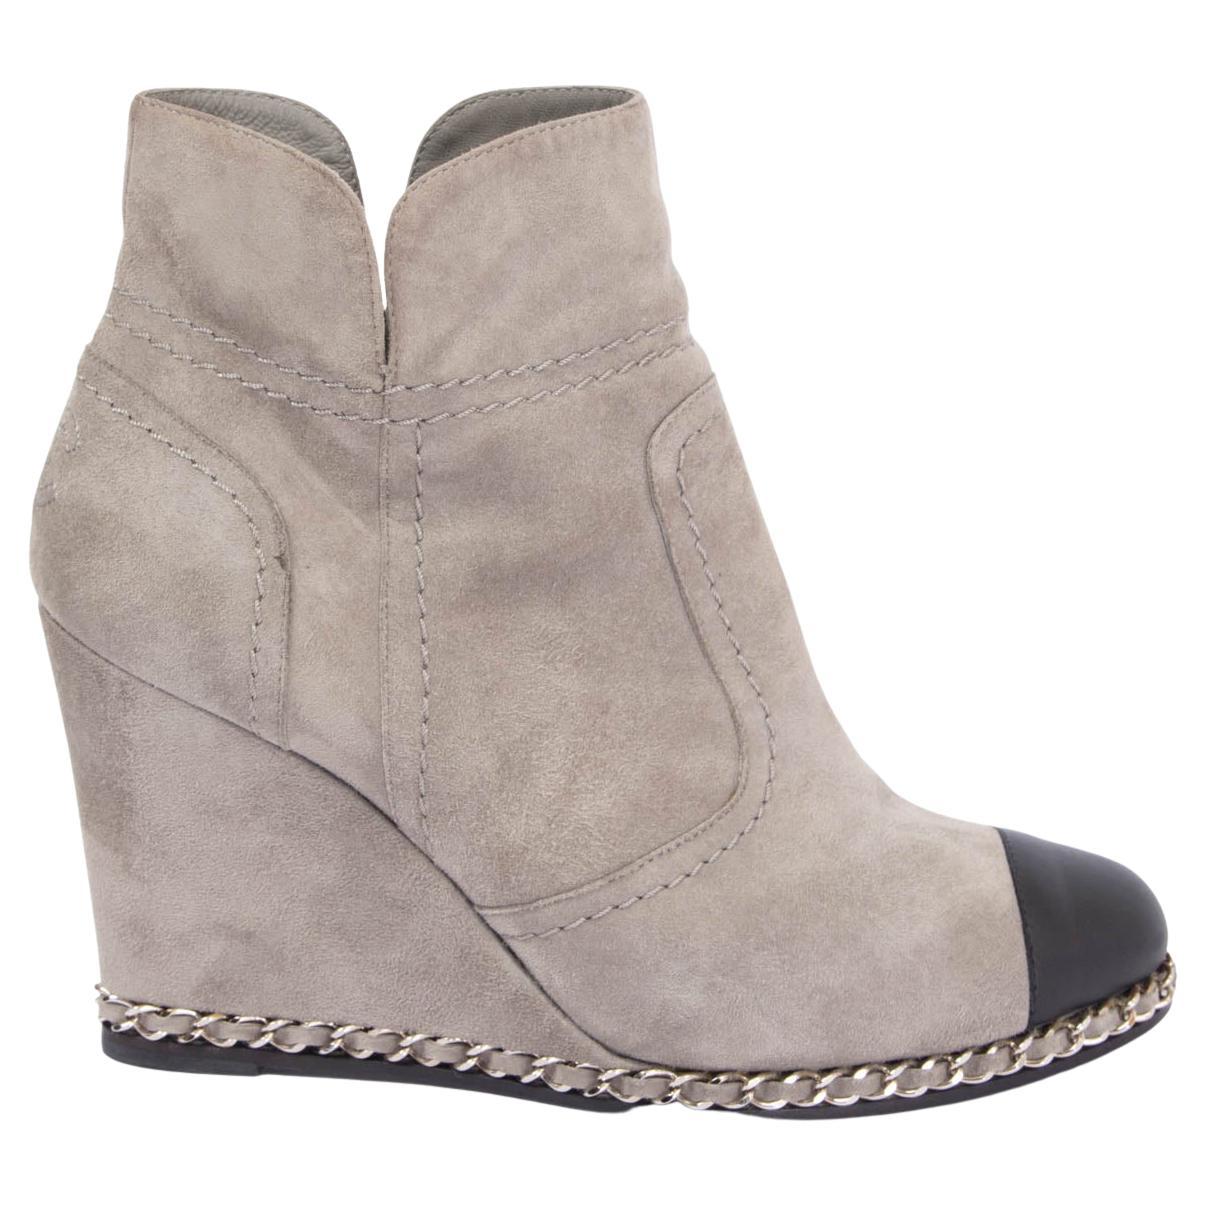 CHANEL grey suede 2011 11K CHAIN TRIM WEDGE Ankle Boots Shoes 38.5 For Sale